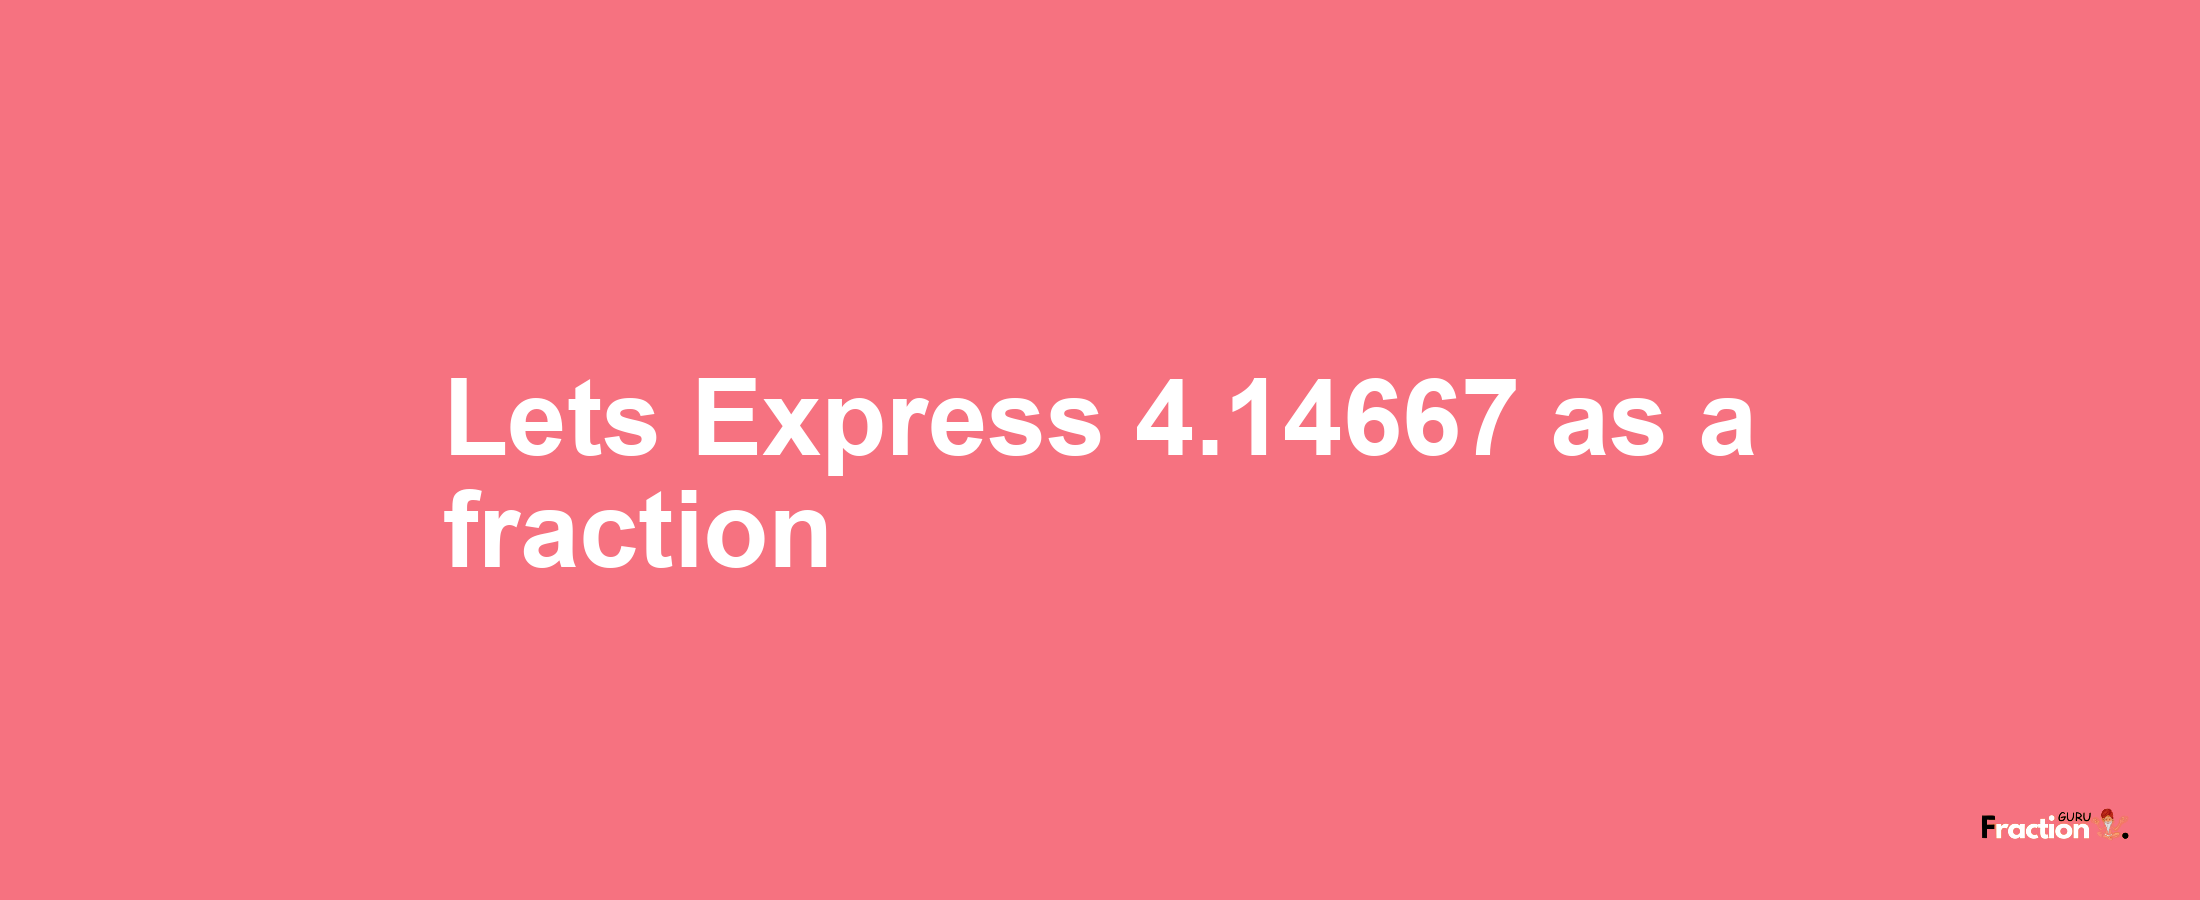 Lets Express 4.14667 as afraction